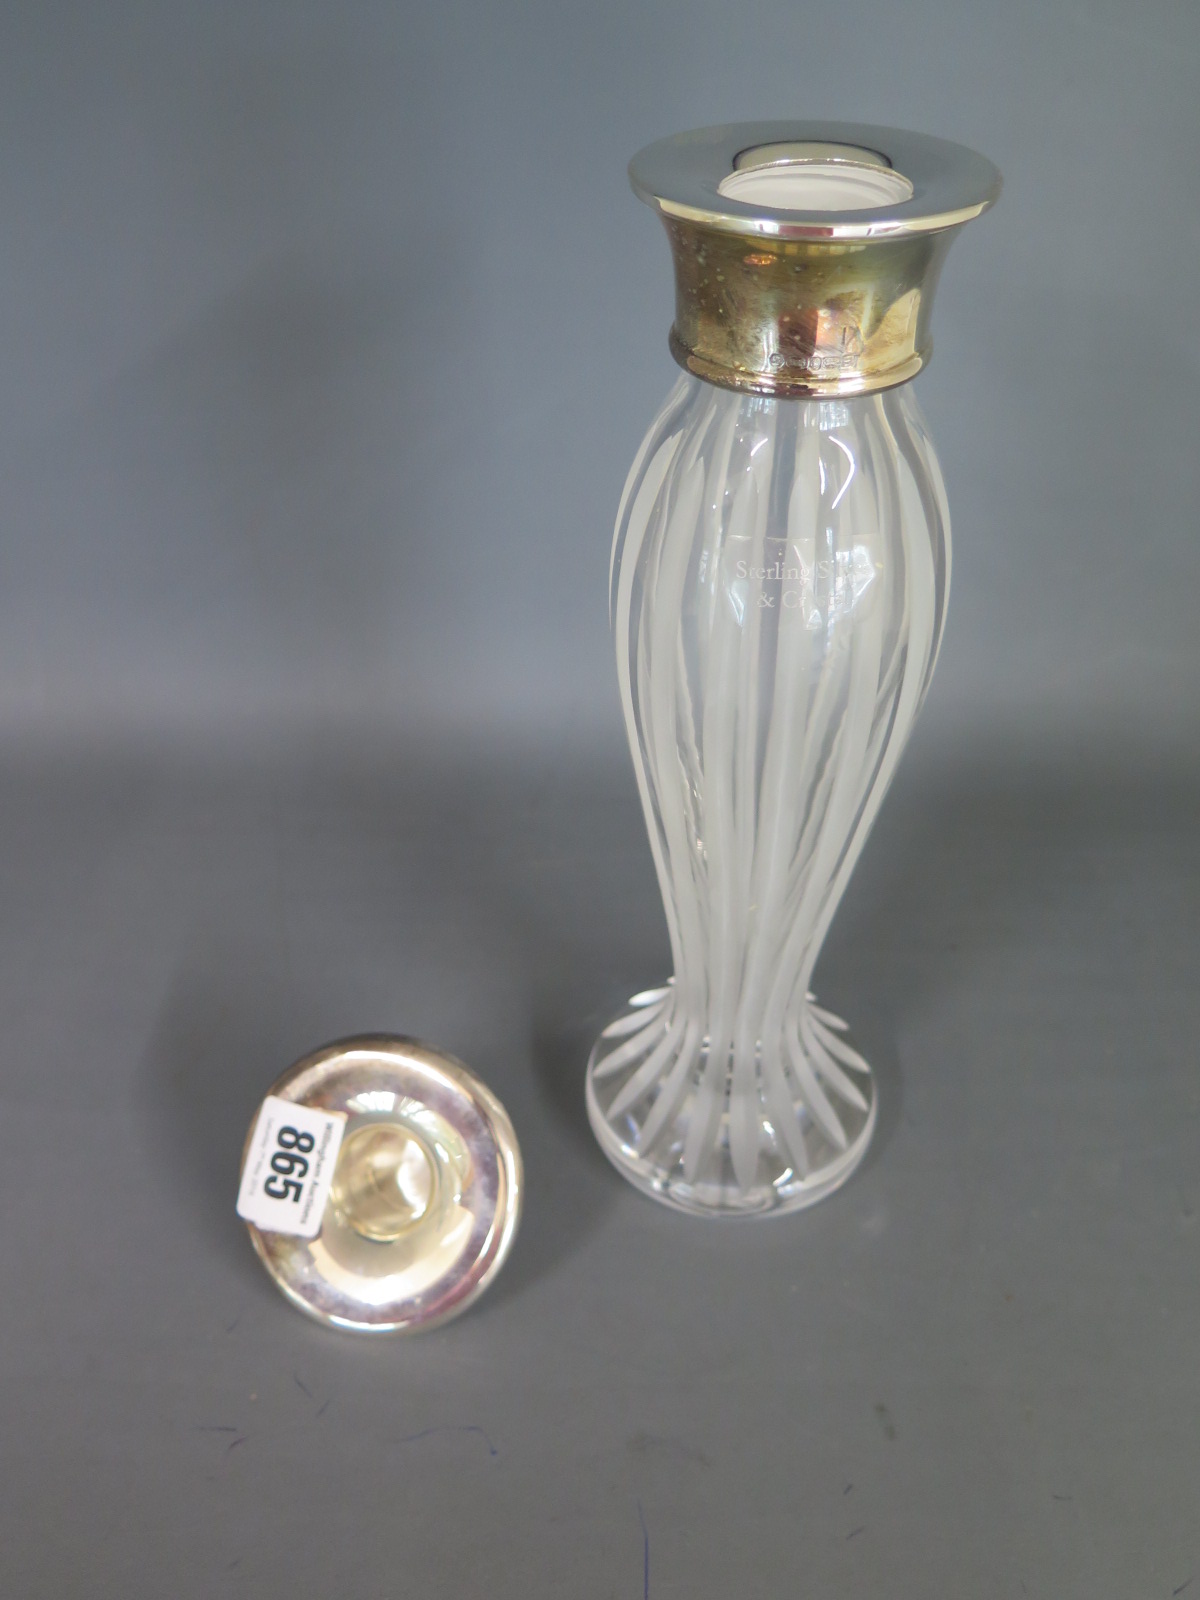 A Carrs silver necked crystal glass vase/candlestick - Height 25. - Image 2 of 3